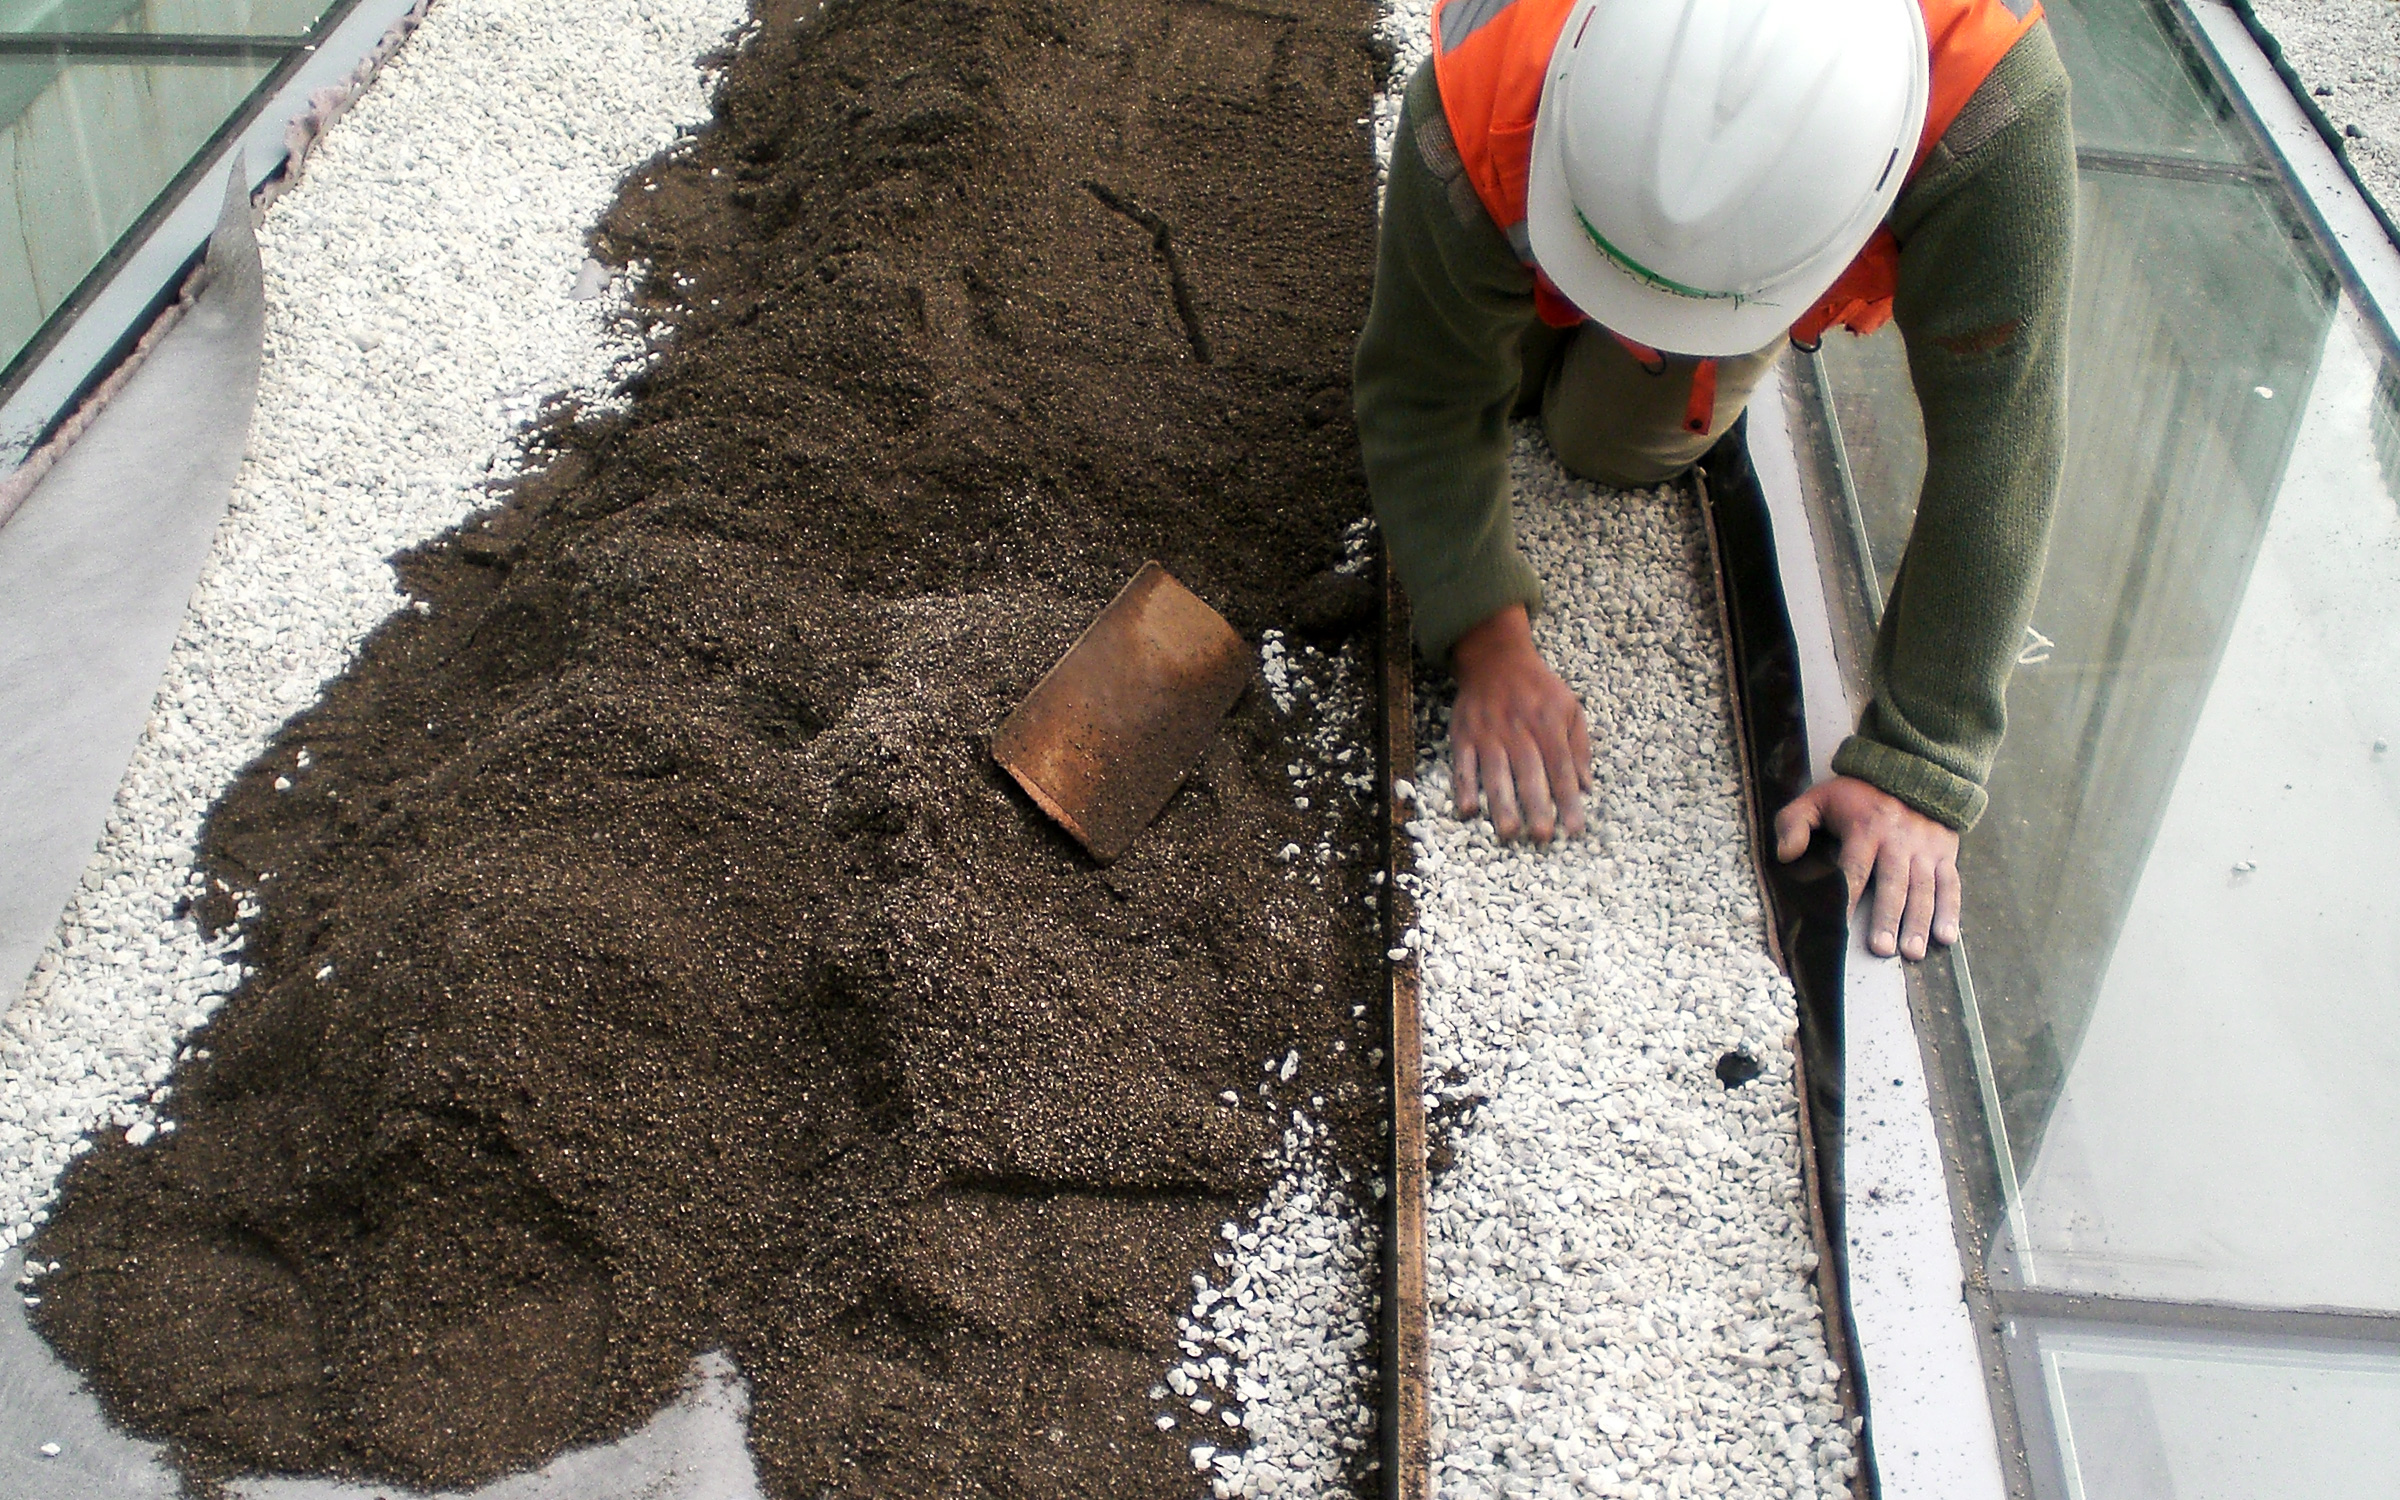 Worker distributing gravel and substrate on a rooftop